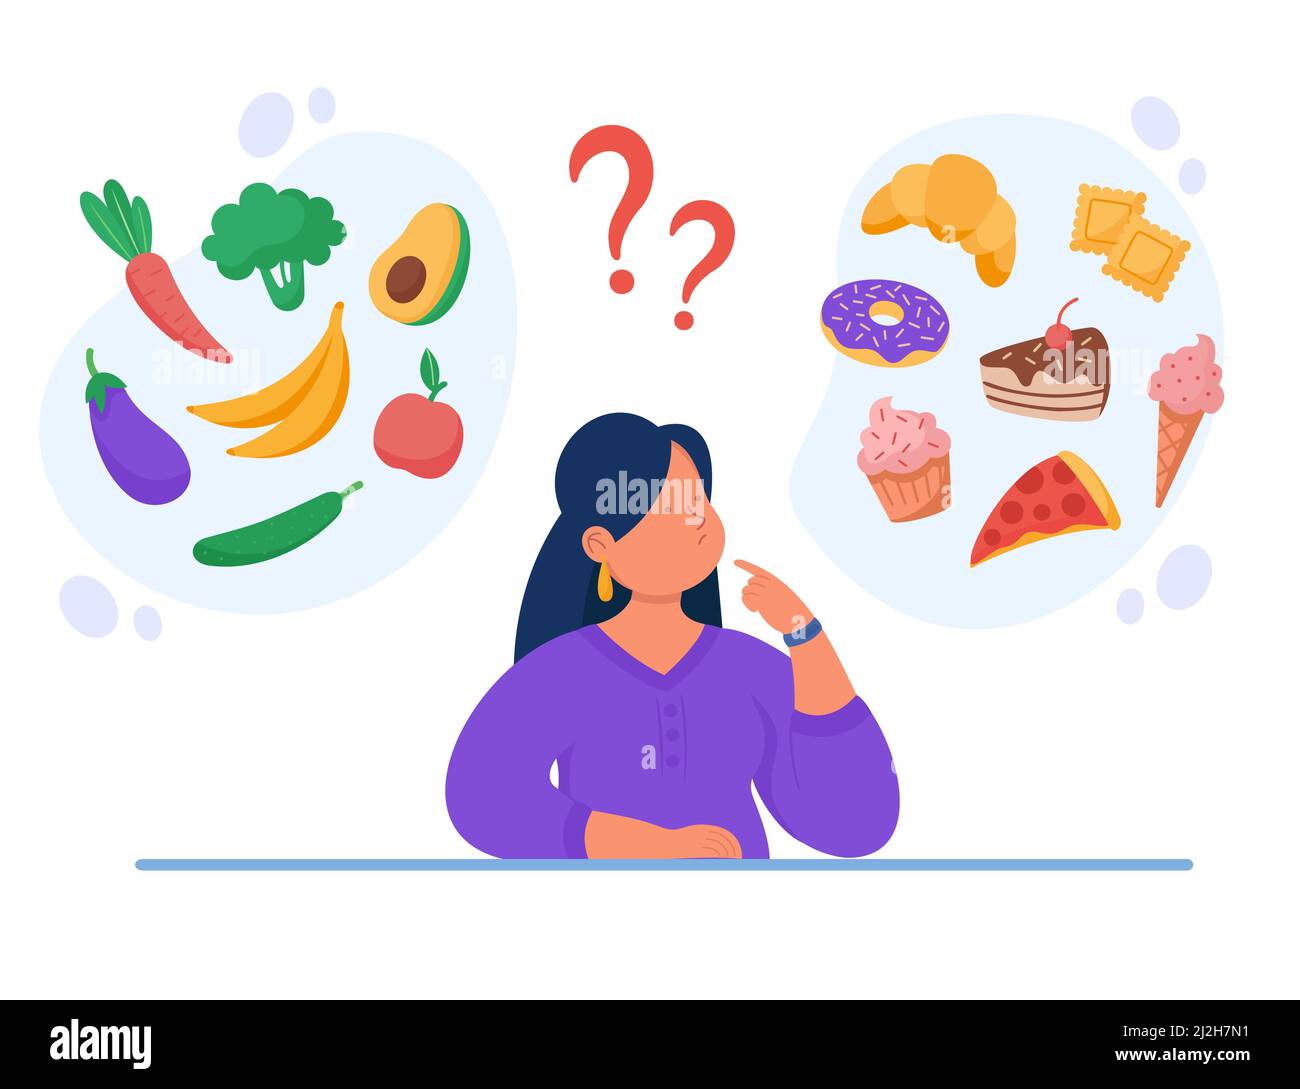 https://c8.alamy.com/comp/2J2H7N1/healthy-vs-unhealthy-food-vector-flat-illustration-woman-thinking-over-junk-food-and-organic-snack-diet-bad-or-good-choice-concept-2J2H7N1.jpg